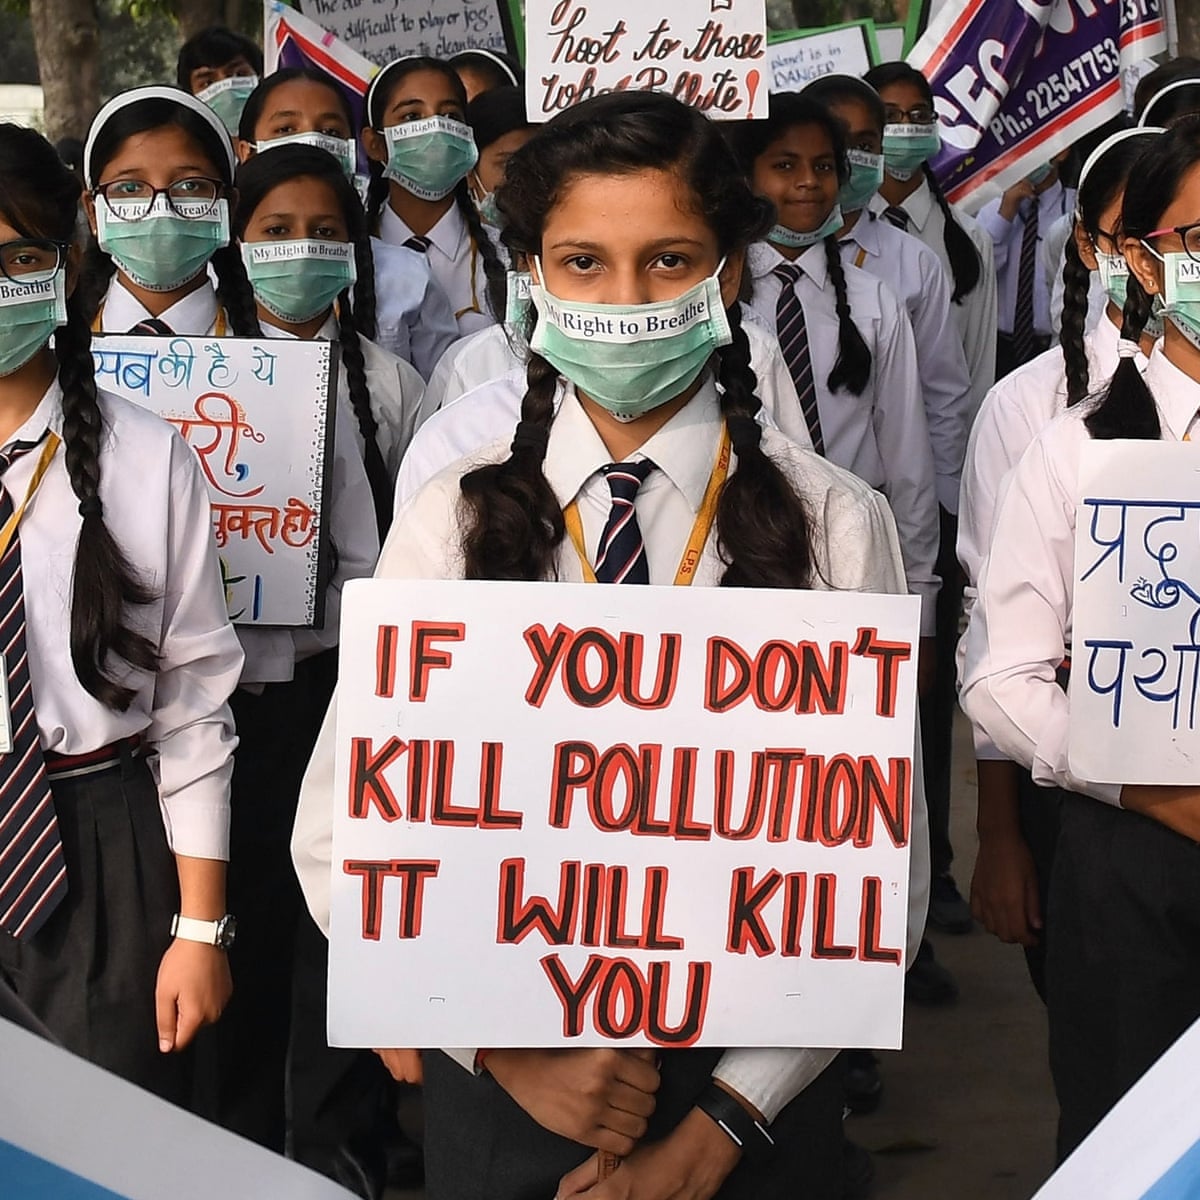 Reducing air pollution. Anti pollution. Effects of protest.